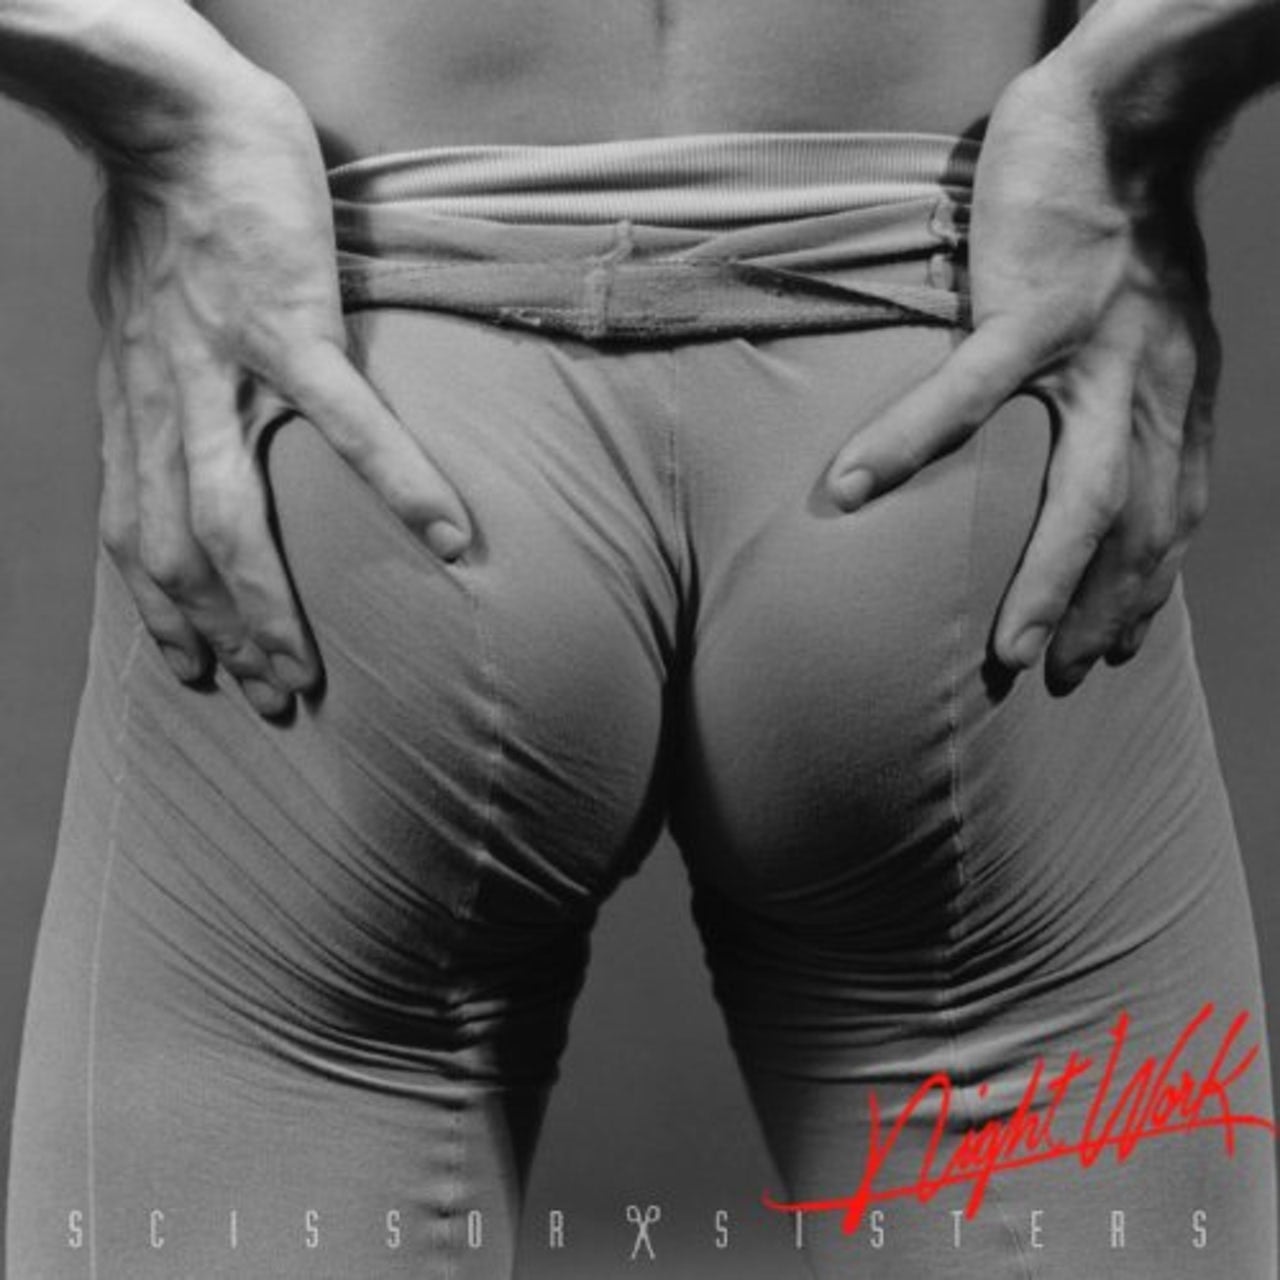 The cover art for Scissor Sisters’ ‘Night Work’, by Robert Mapplethorpe